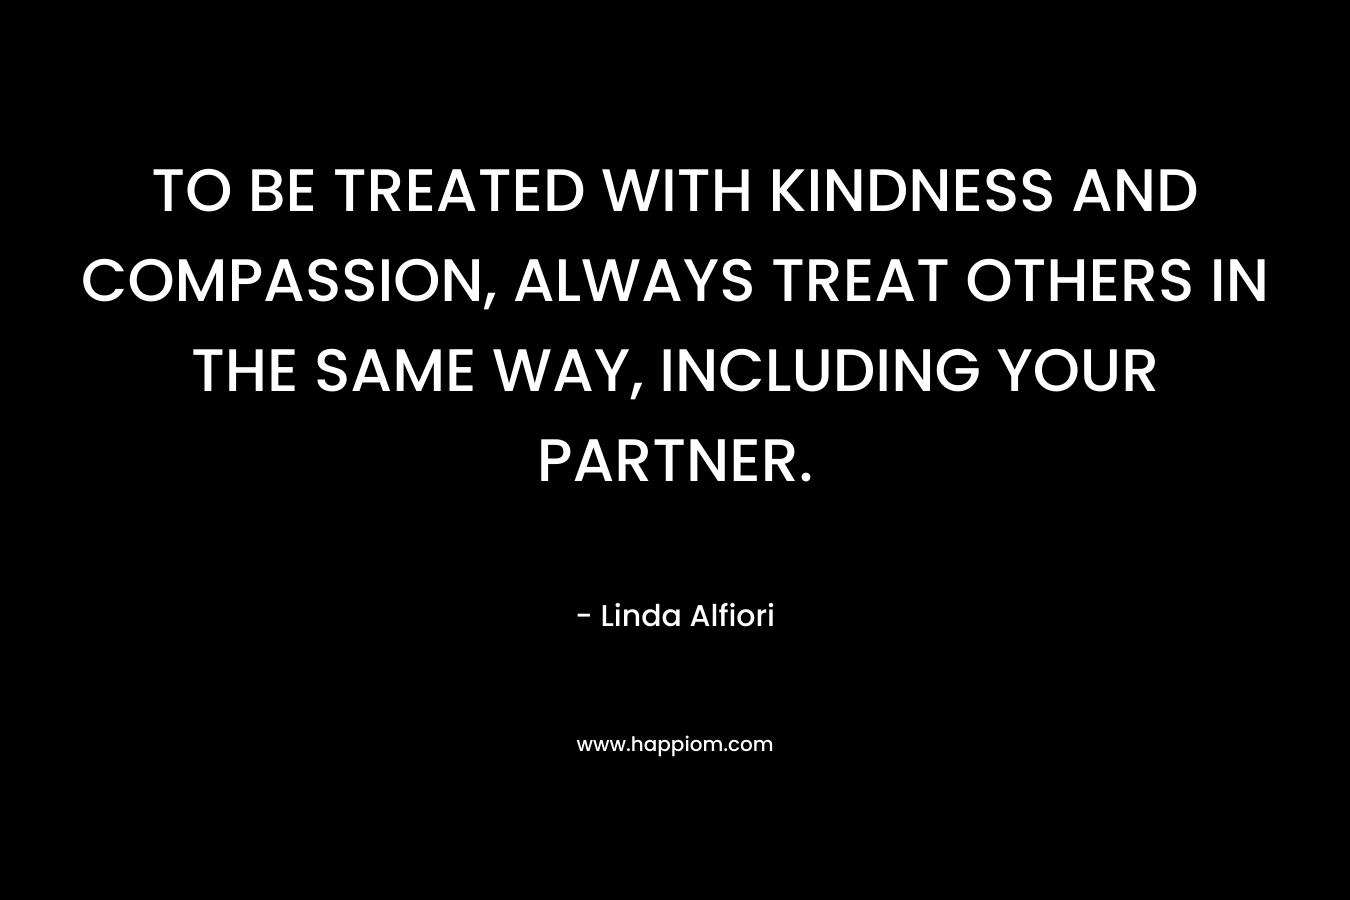 TO BE TREATED WITH KINDNESS AND COMPASSION, ALWAYS TREAT OTHERS IN THE SAME WAY, INCLUDING YOUR PARTNER.